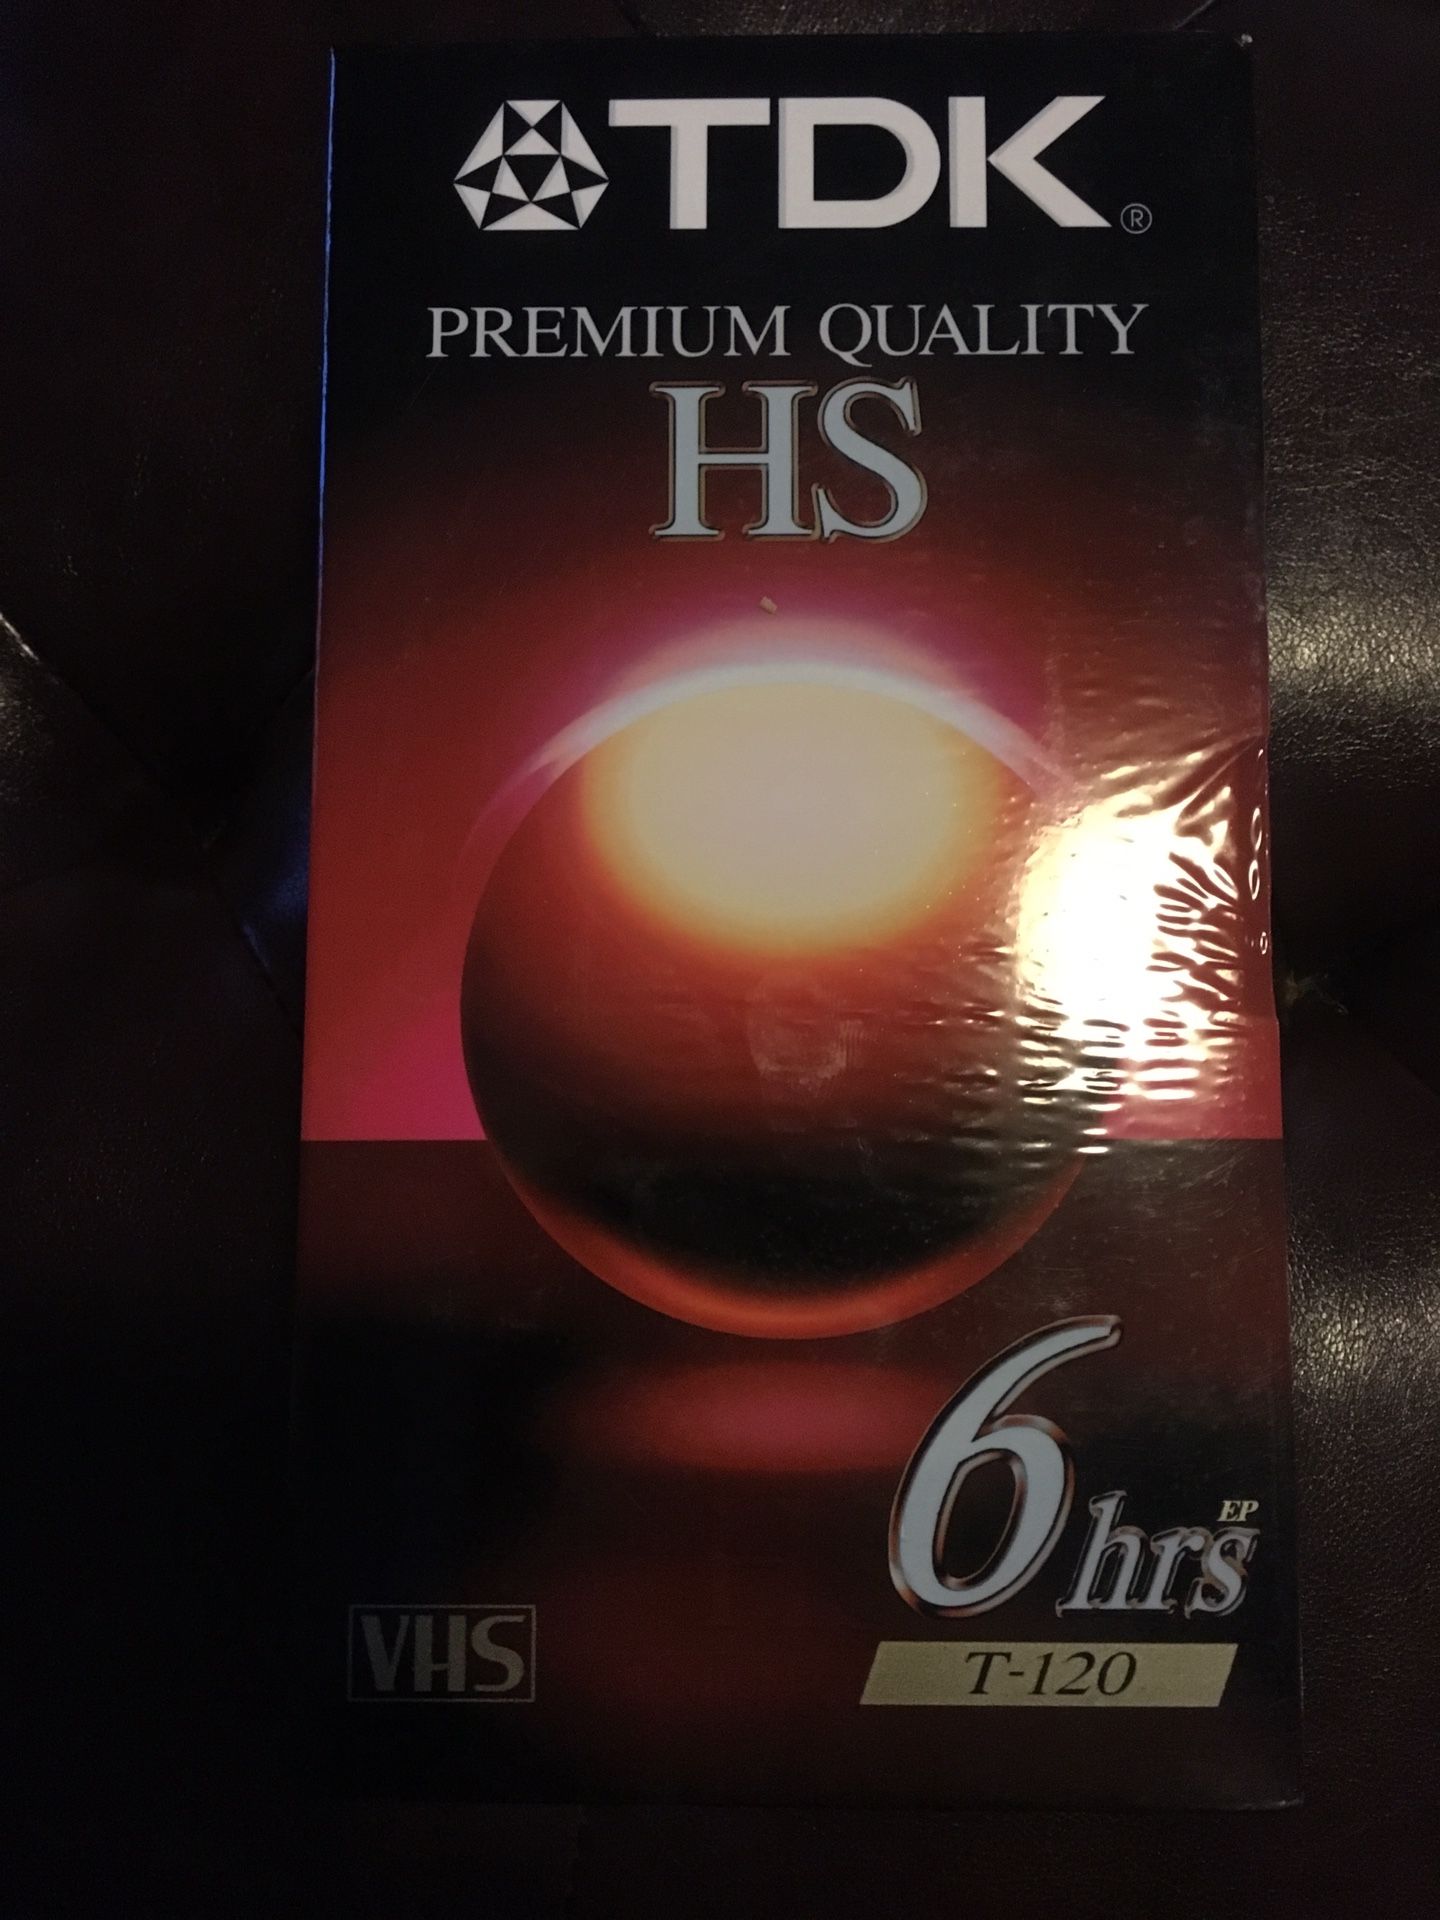 TDK Premium Quality HS VHS Tapes (never opened)